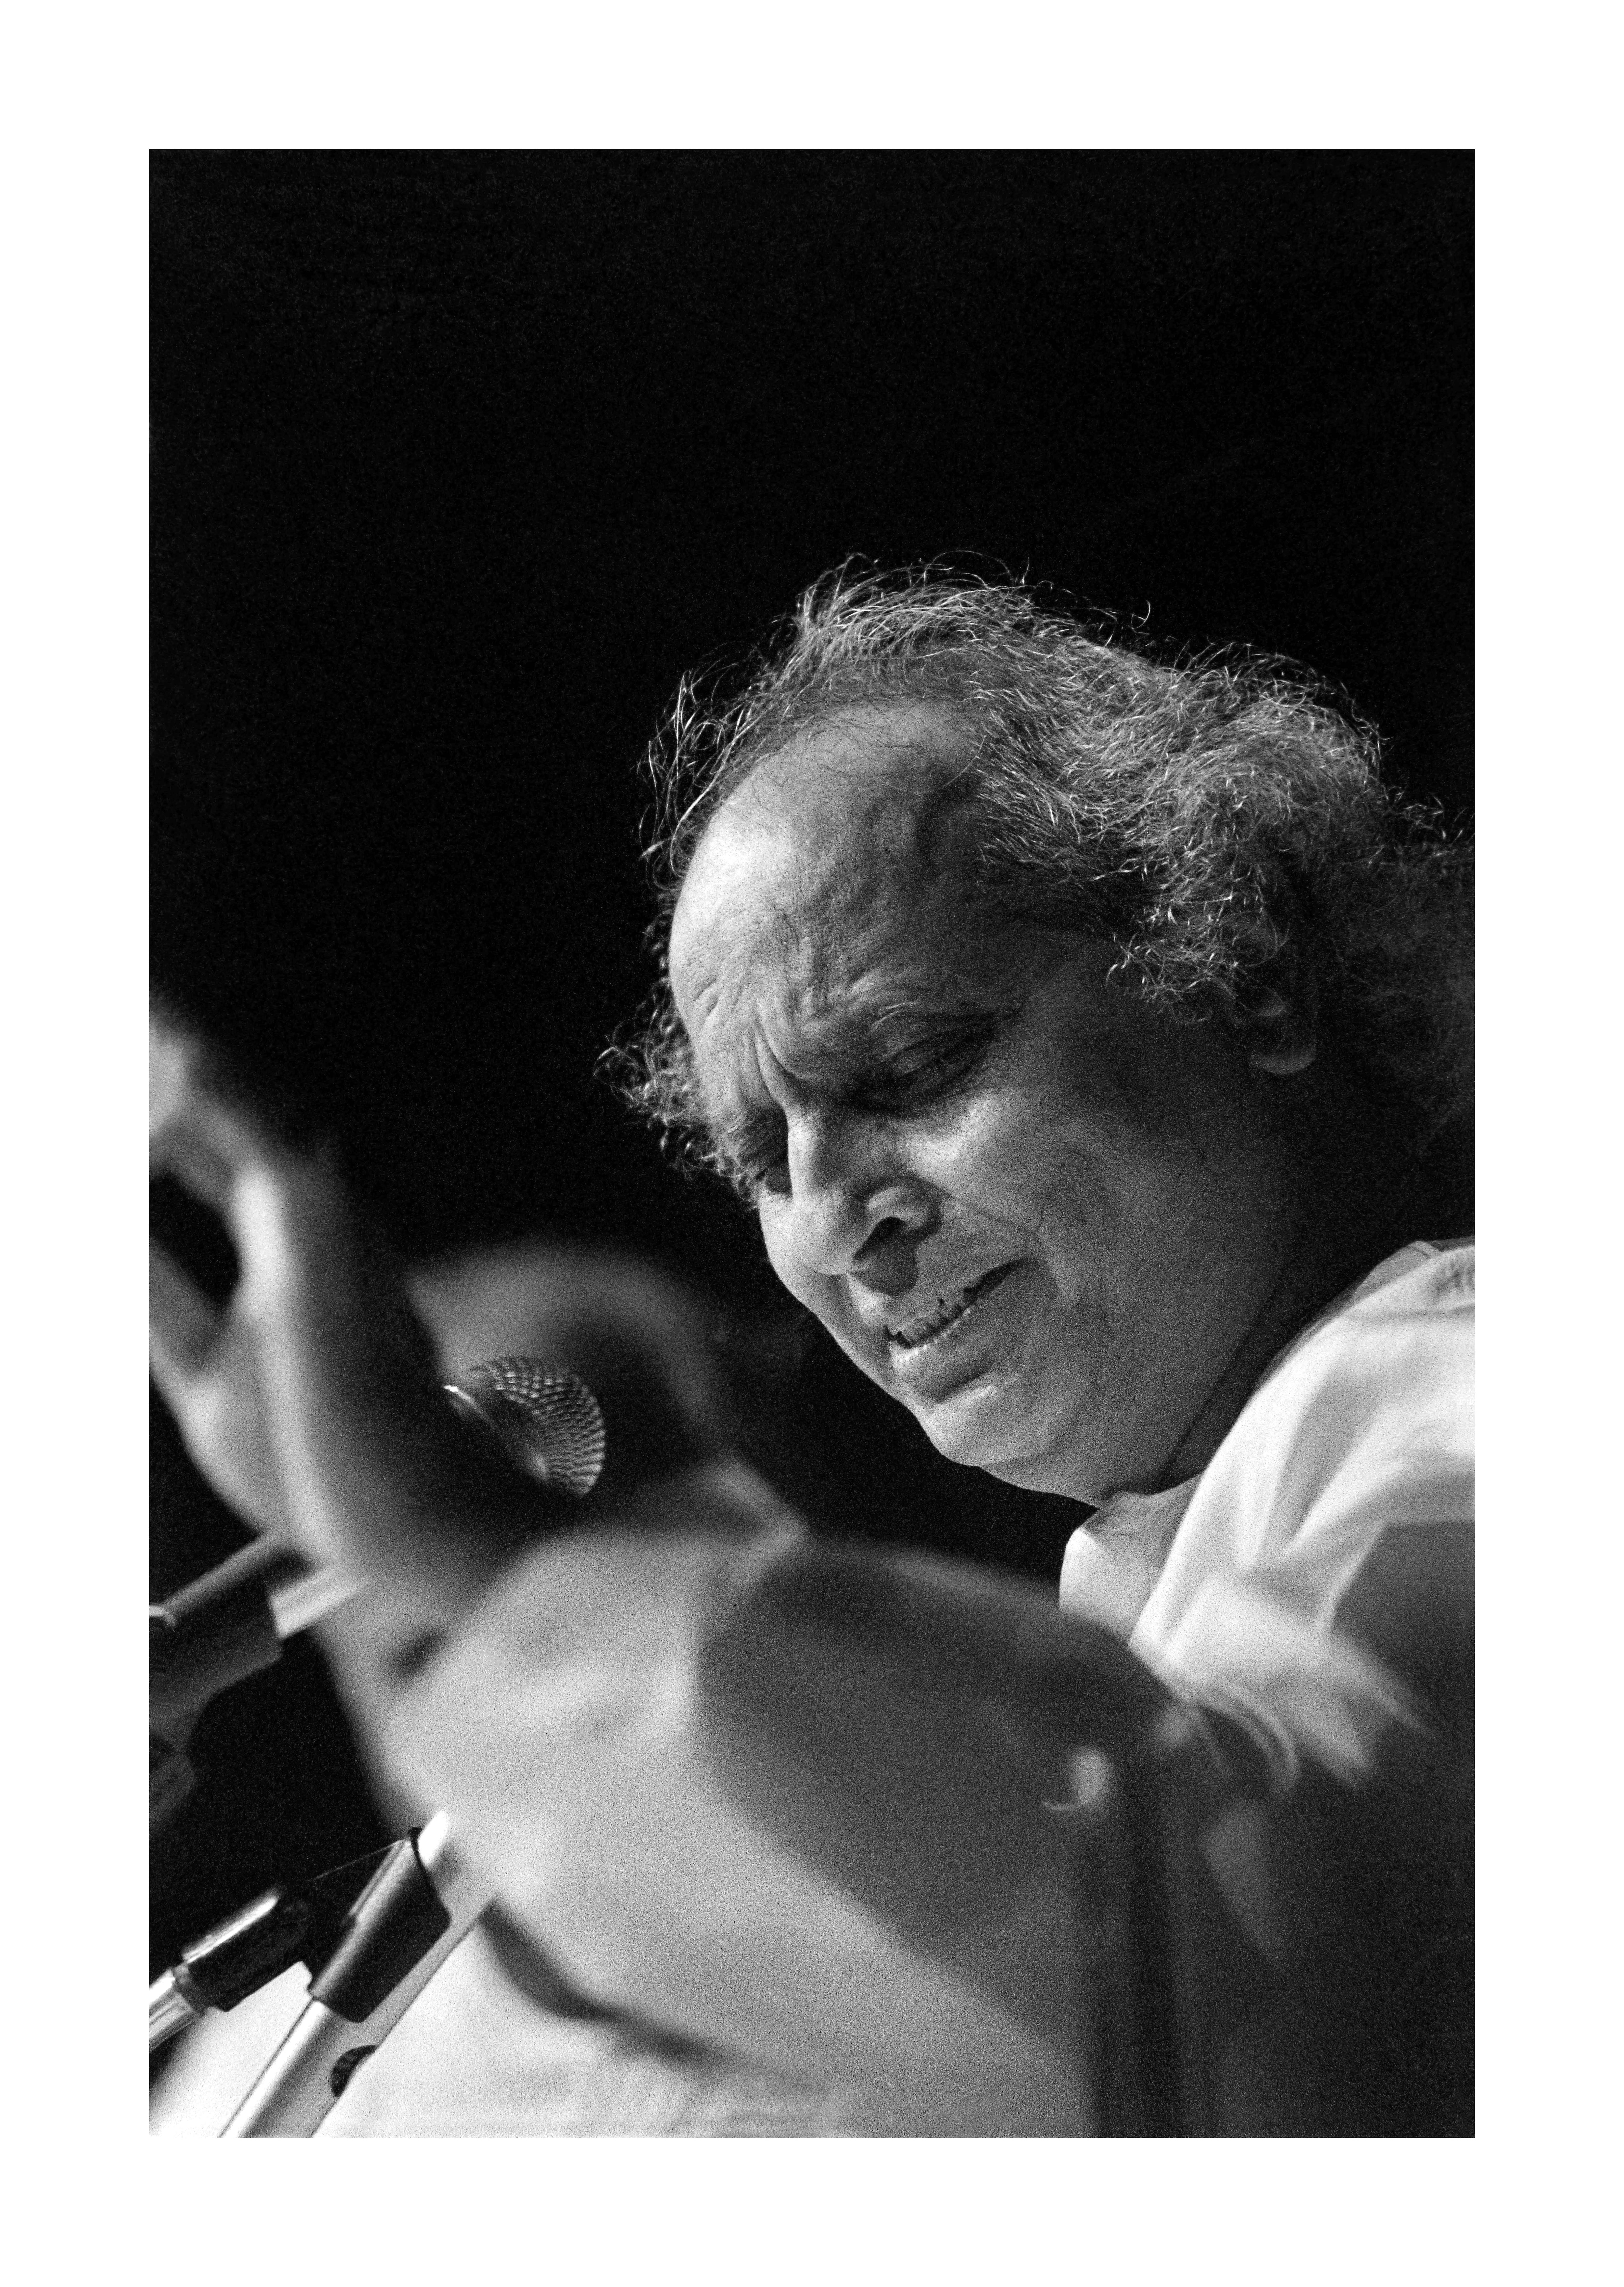 Classical singer, the late Pt Jasraj, captured by Pasricha during one of his performances.